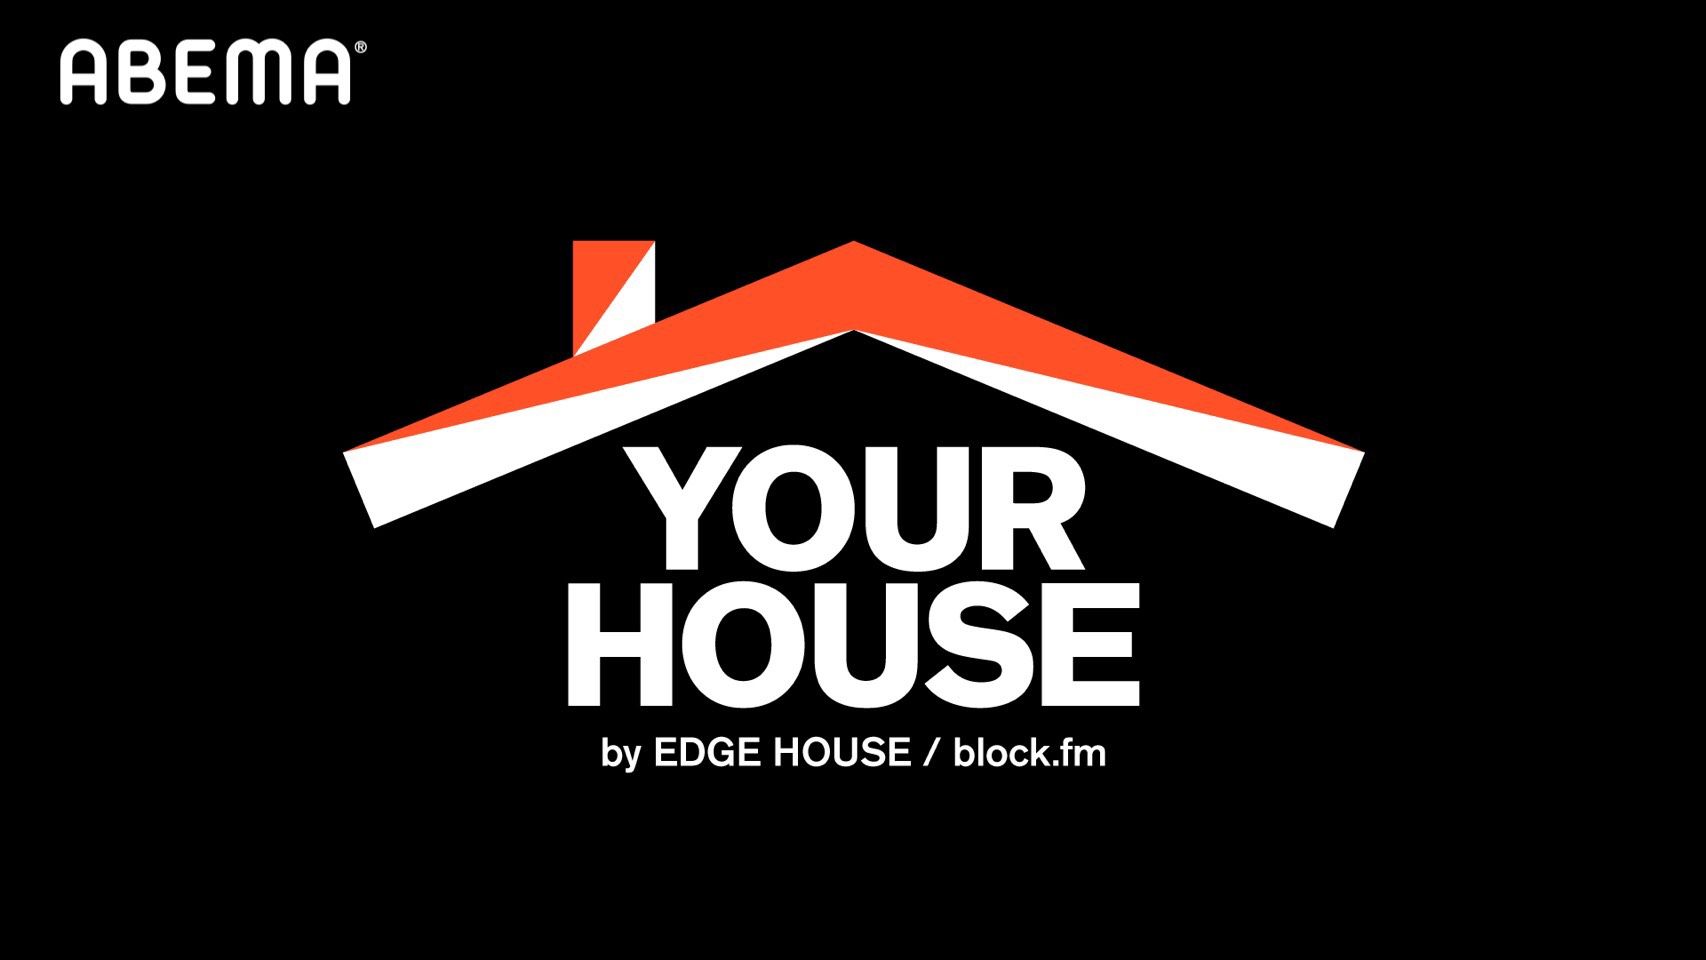 [Live Streaming] YOUR HOUSE by EDGE HOUSE/block.fm